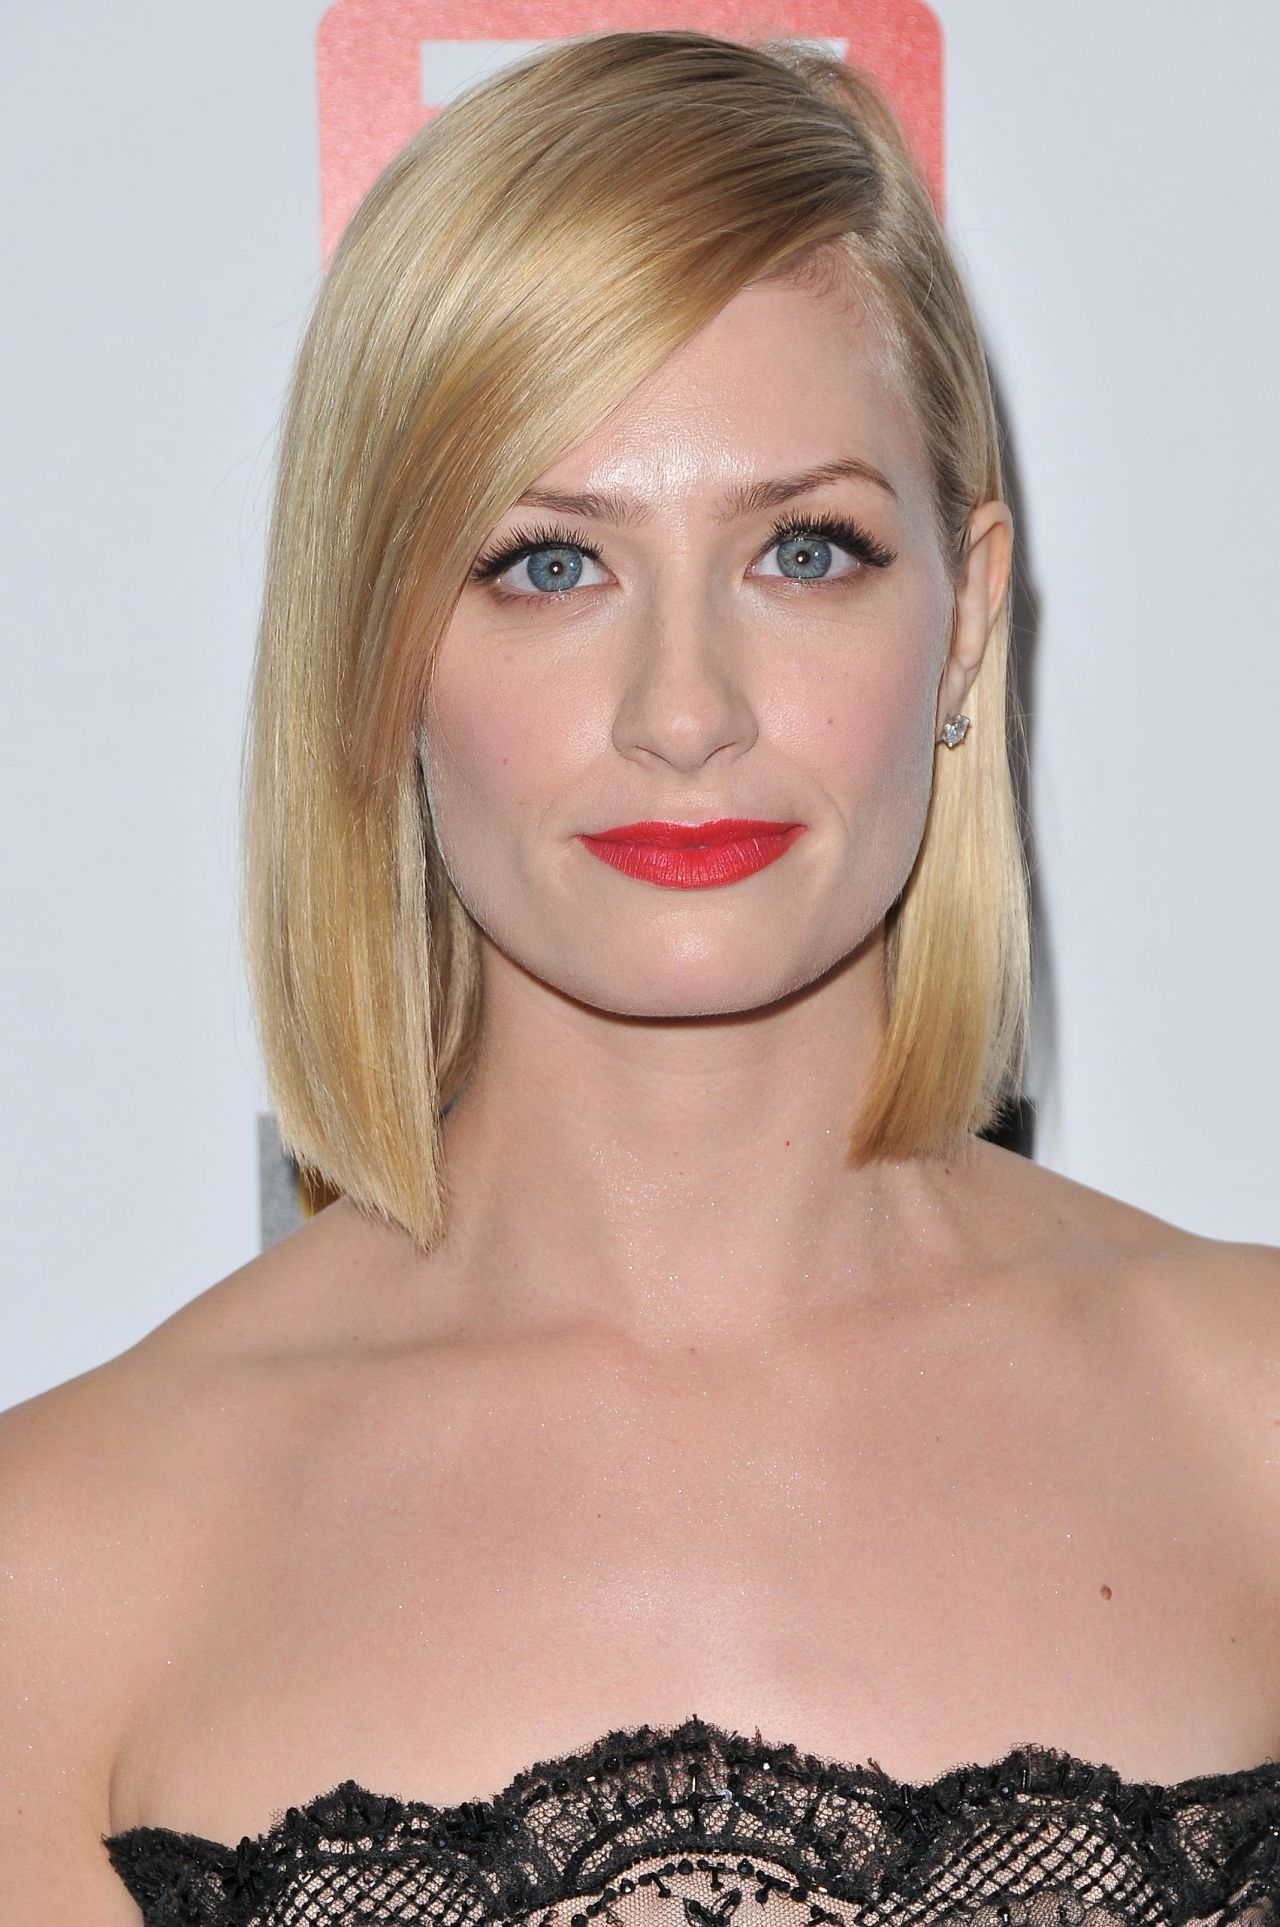 Best of Beth behrs naked photos